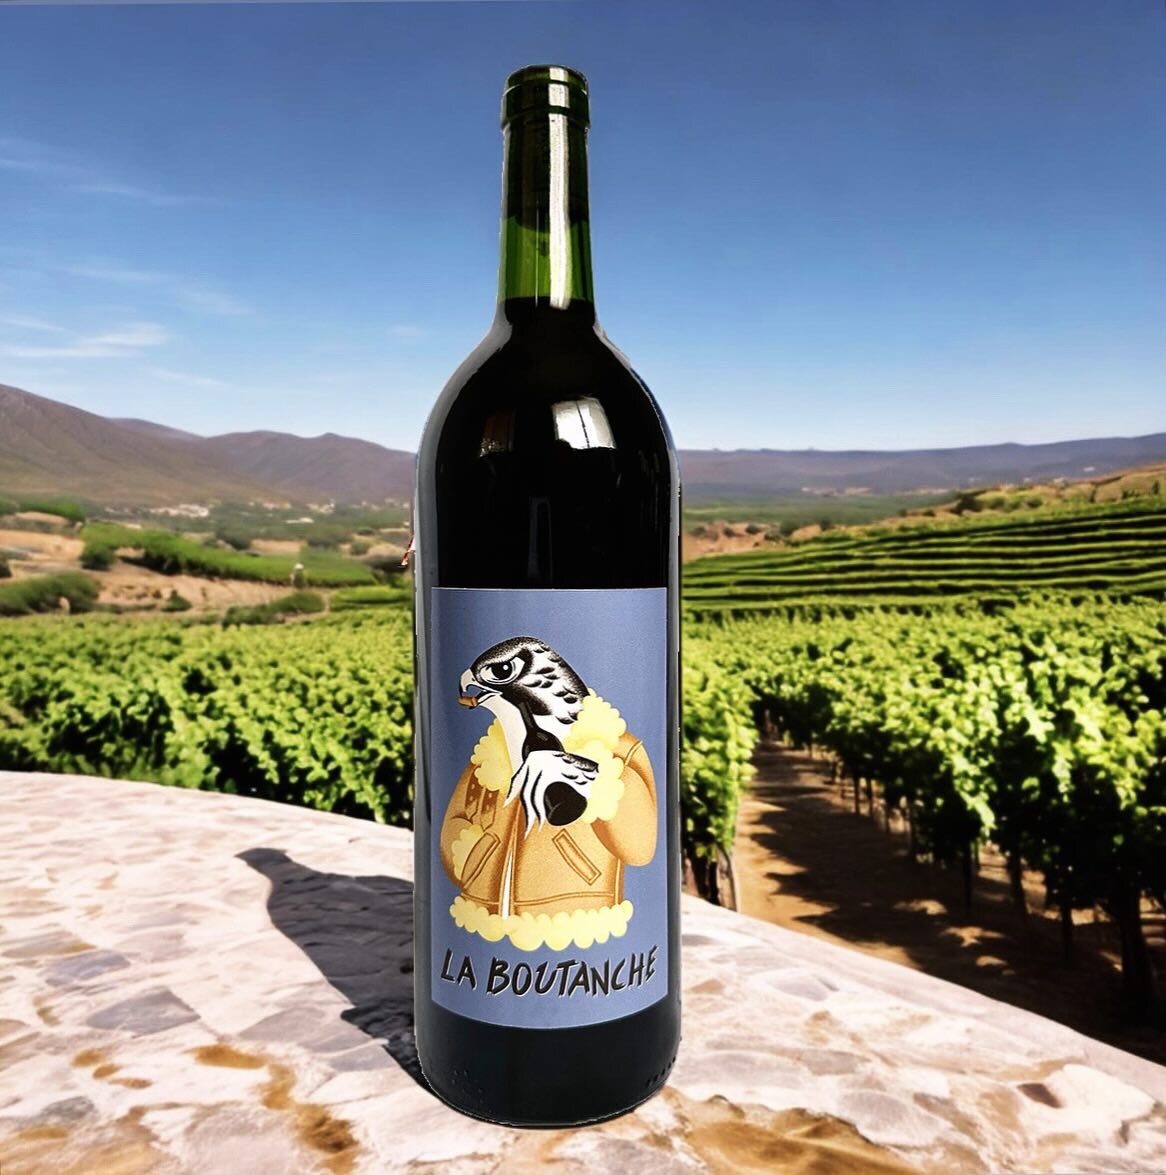 This wild, soulful La Boutanche bottling of Grenache and Niellucciu is crafted by star winemaker Thomas Santamaria in Patrimonio, on the northern tip of the Mediterranean island of Corsica. Santamaria is the sixth generation to take over the estate a